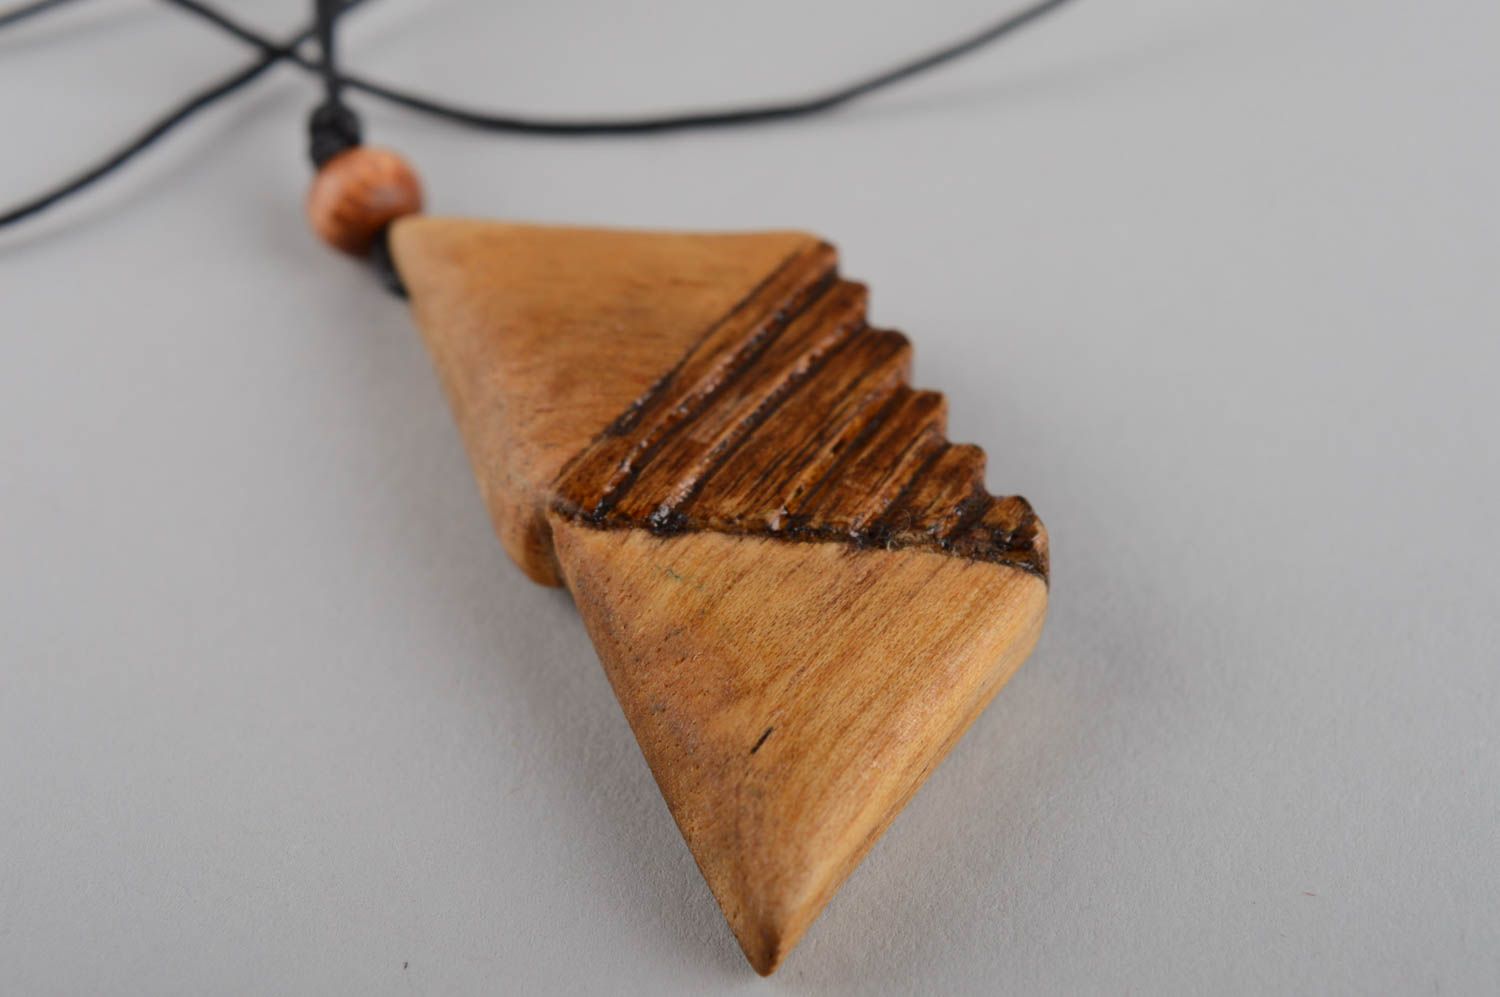 Stylish handmade wooden pendant artisan jewelry designs wood craft gifts for her photo 10